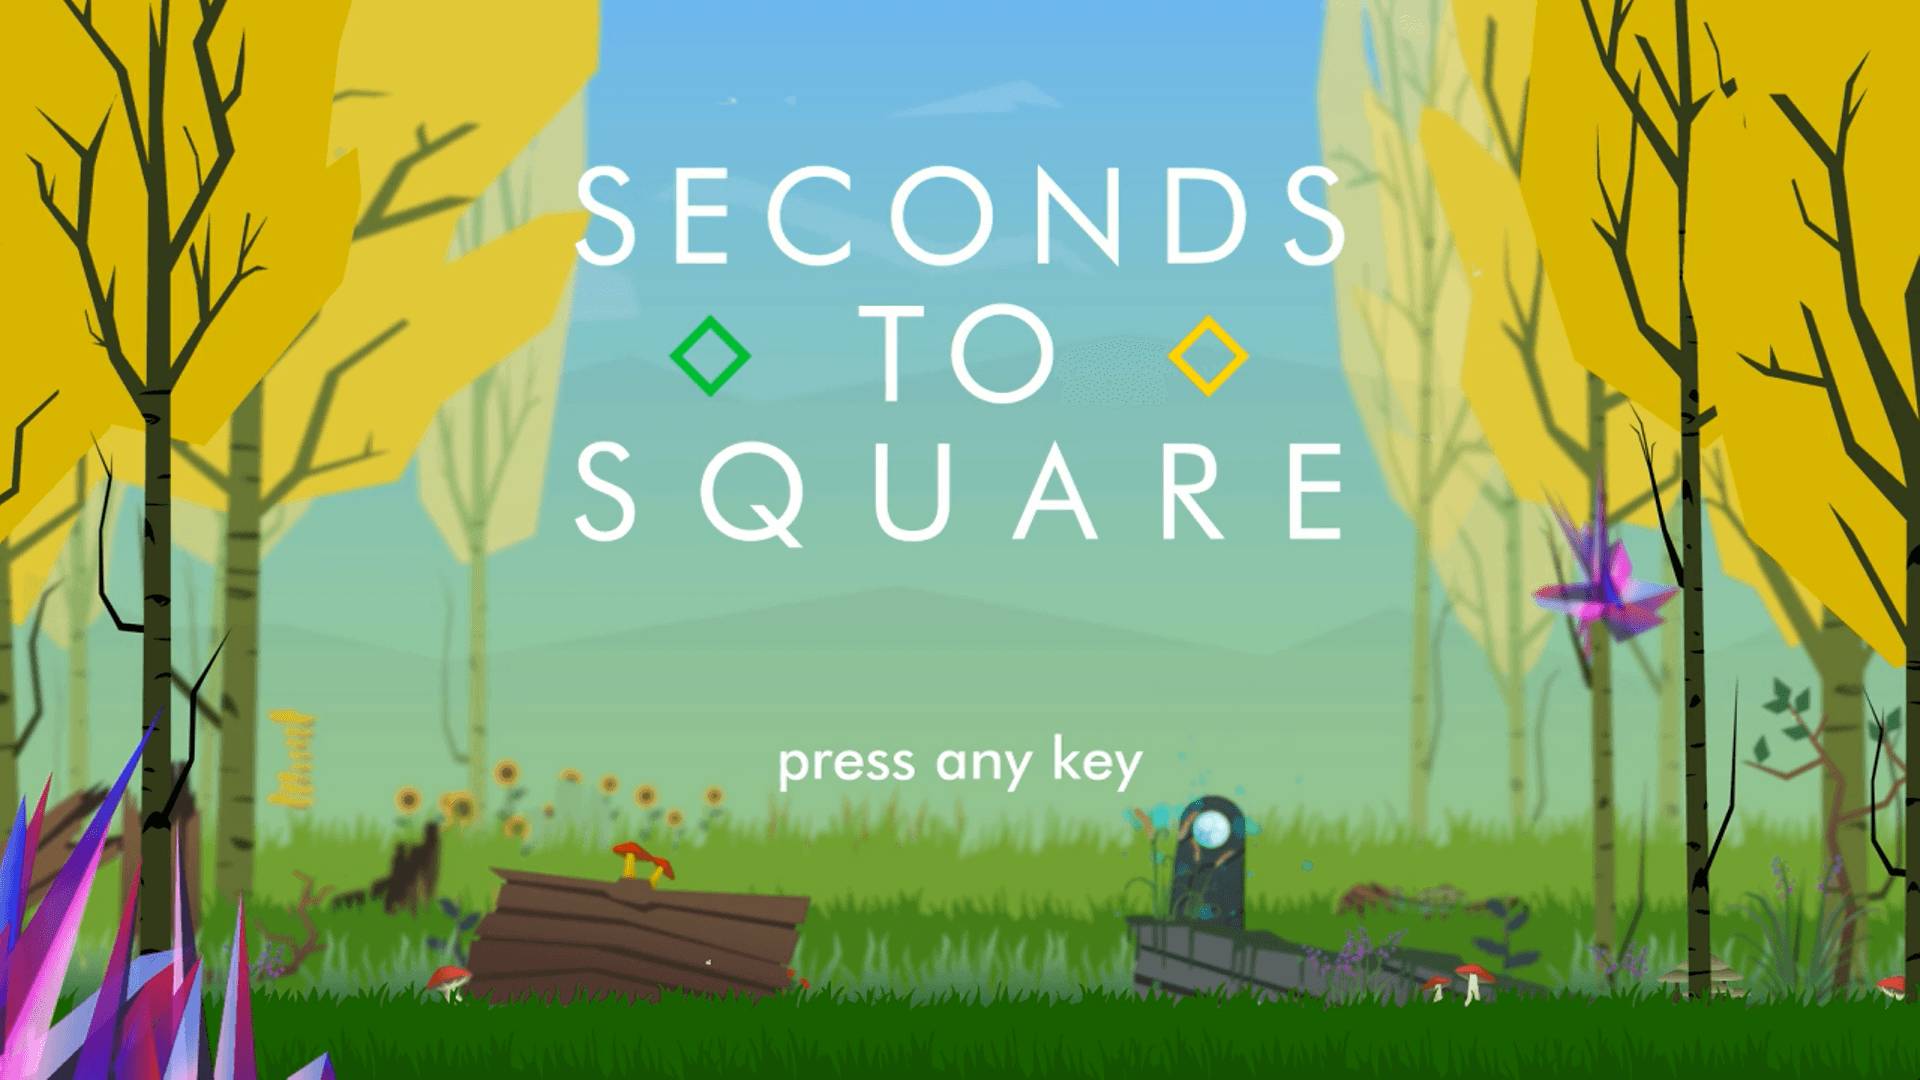 Find you 2 game. 5 Seconds игра. 30 Seconds game. Steam Square. Square two.